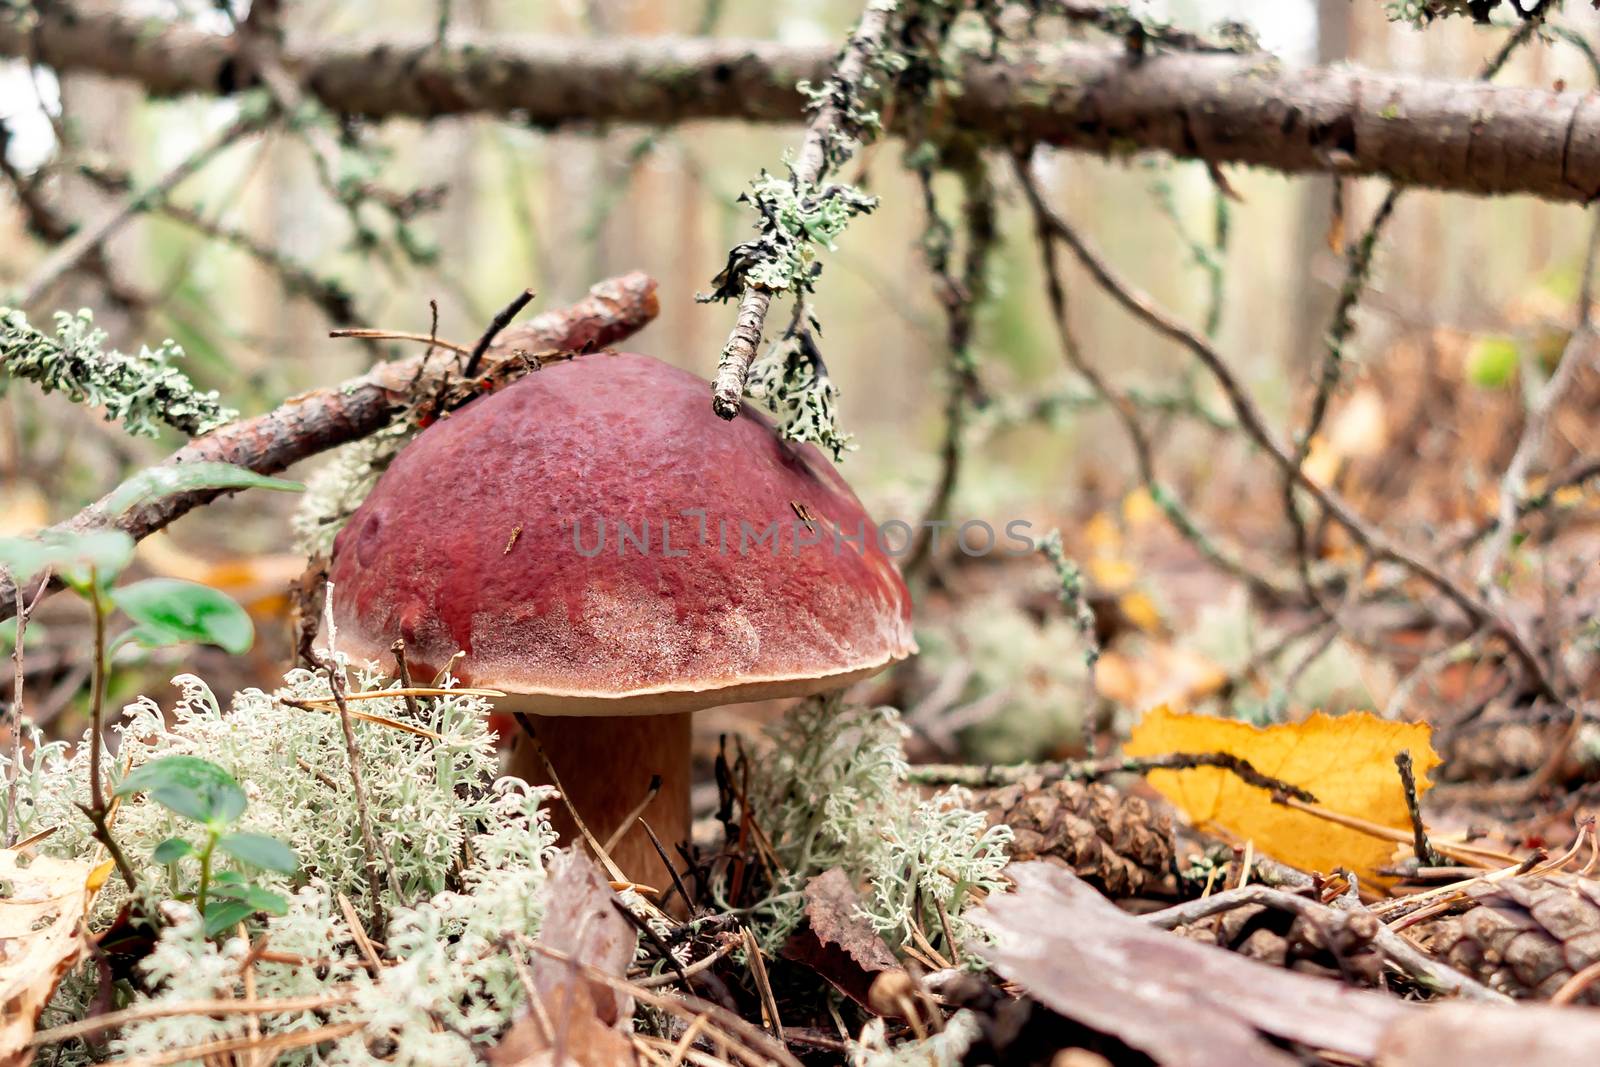 Edible boletus edulis mushroom, known as a penny bun or king bolete growing in a pine forest - image by galsand